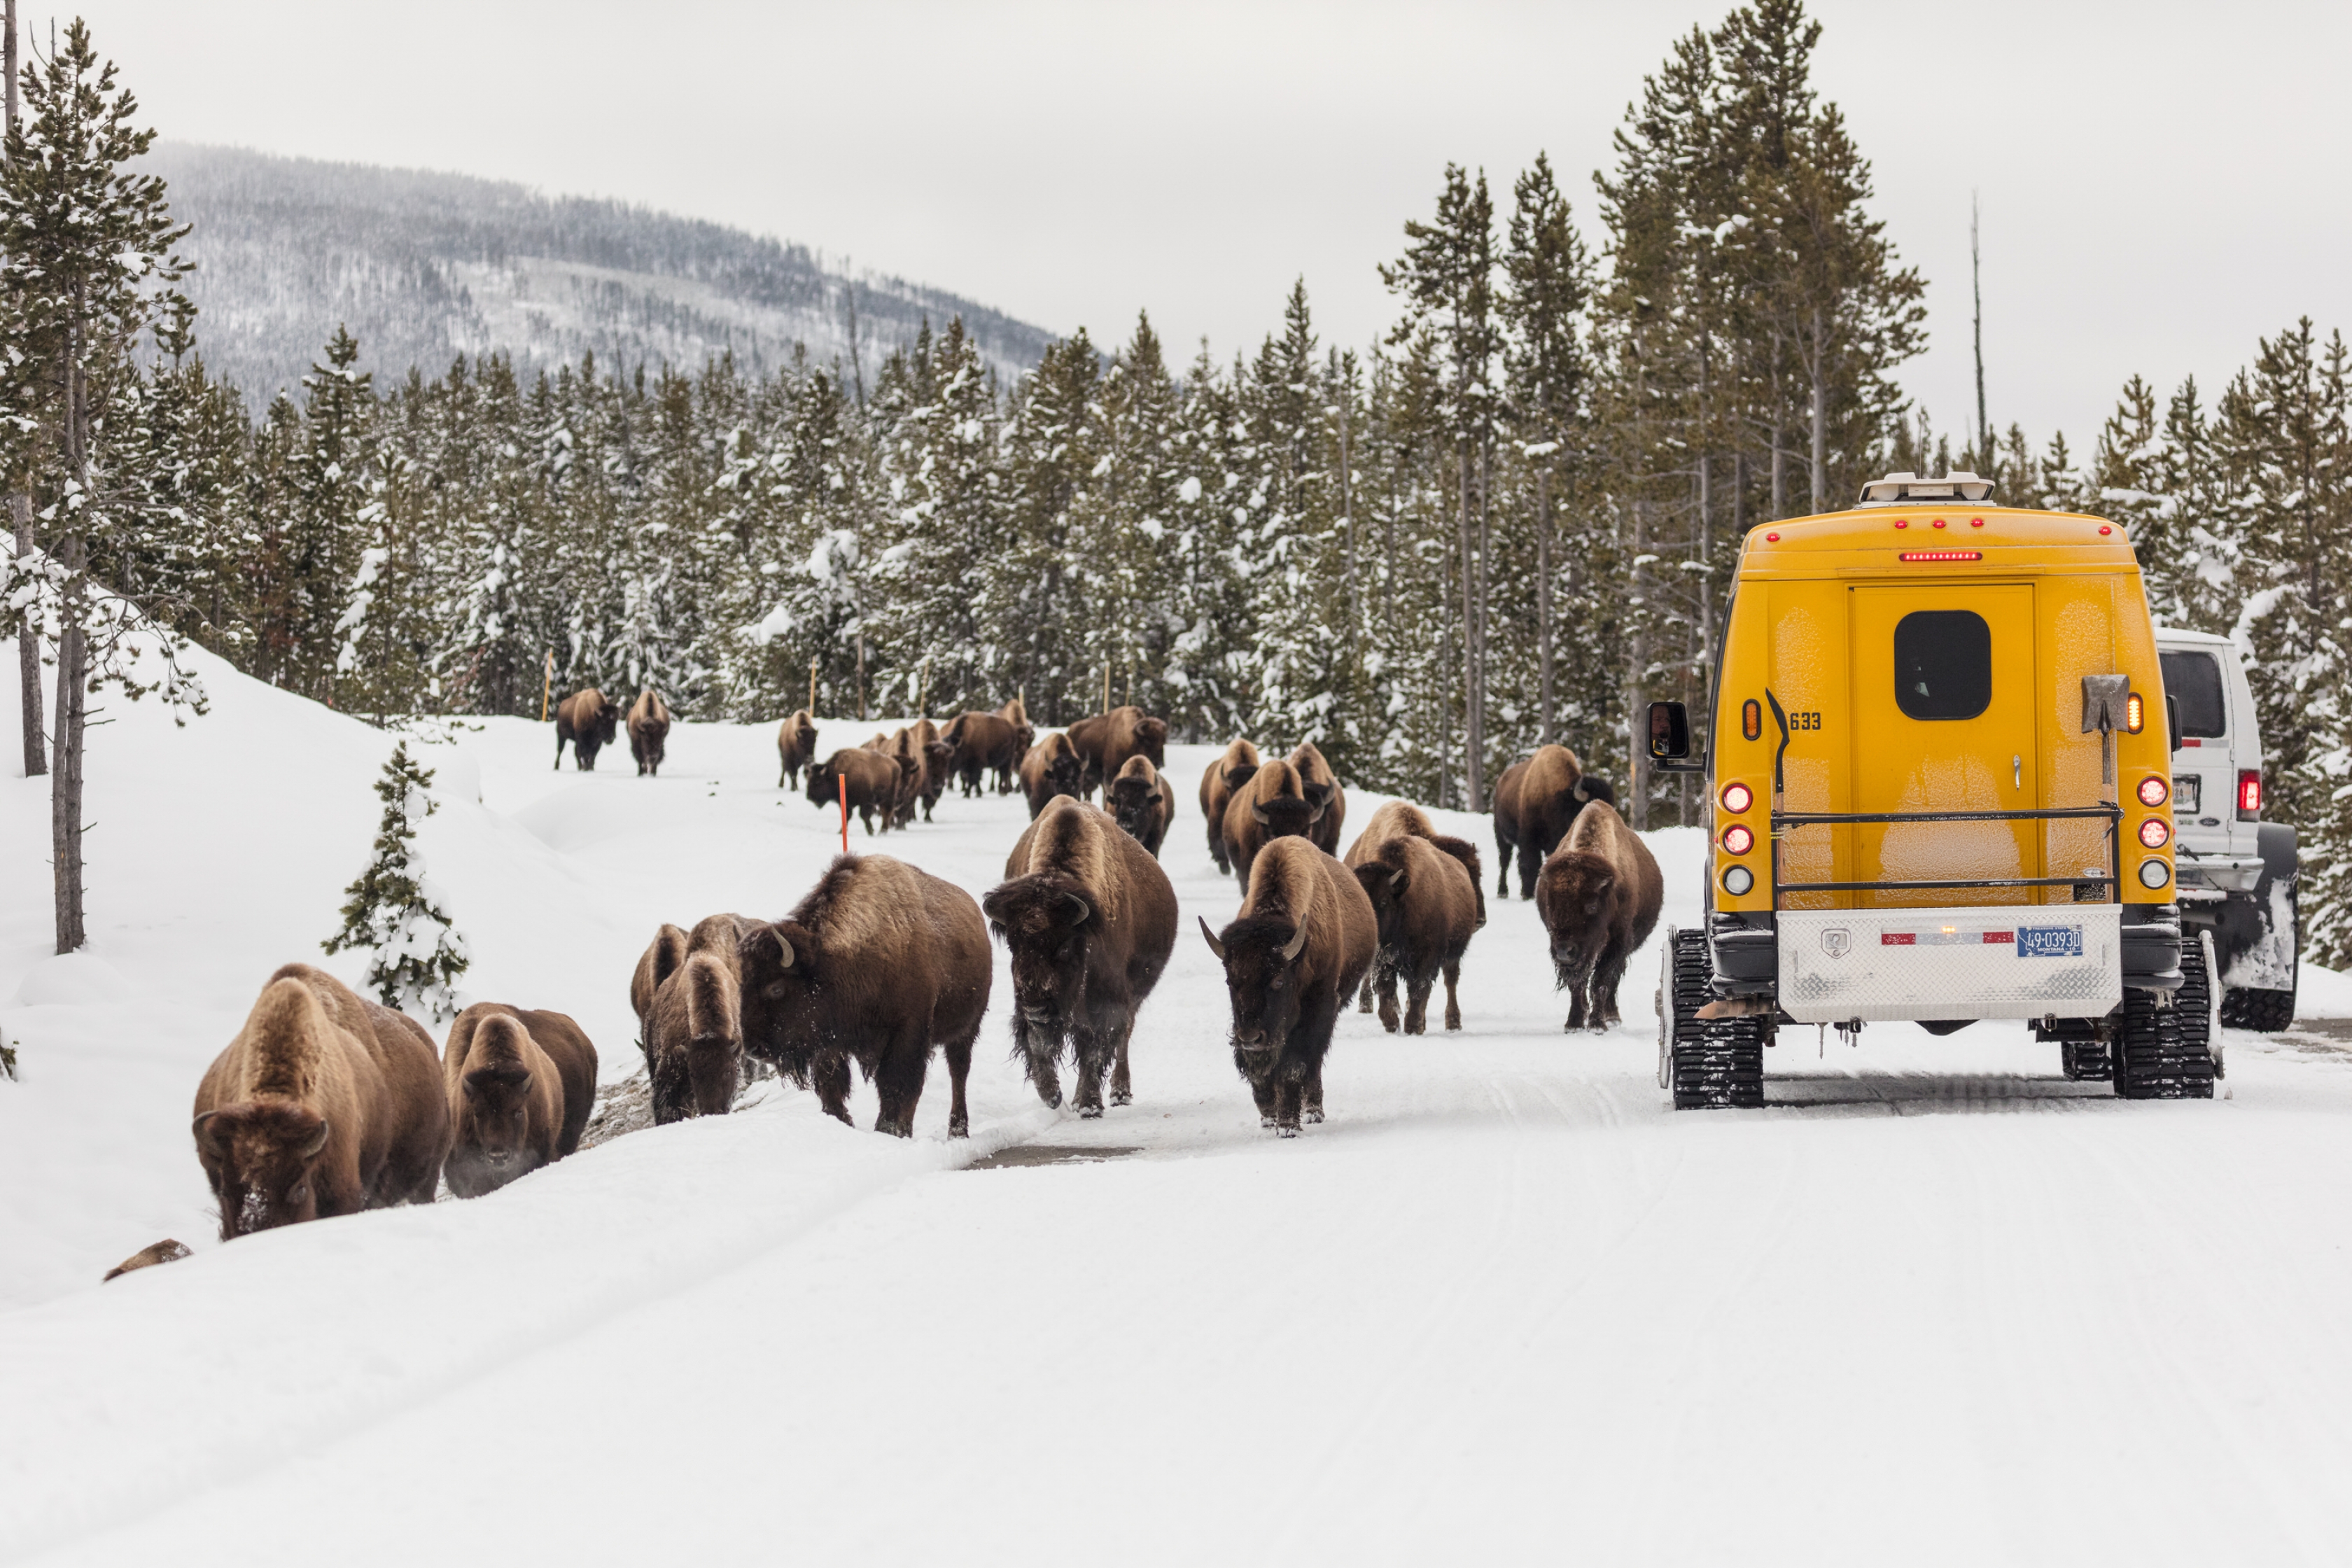 A herd of bison and a yellow snowcoach sharing the snowy road at Yellowstone National Park